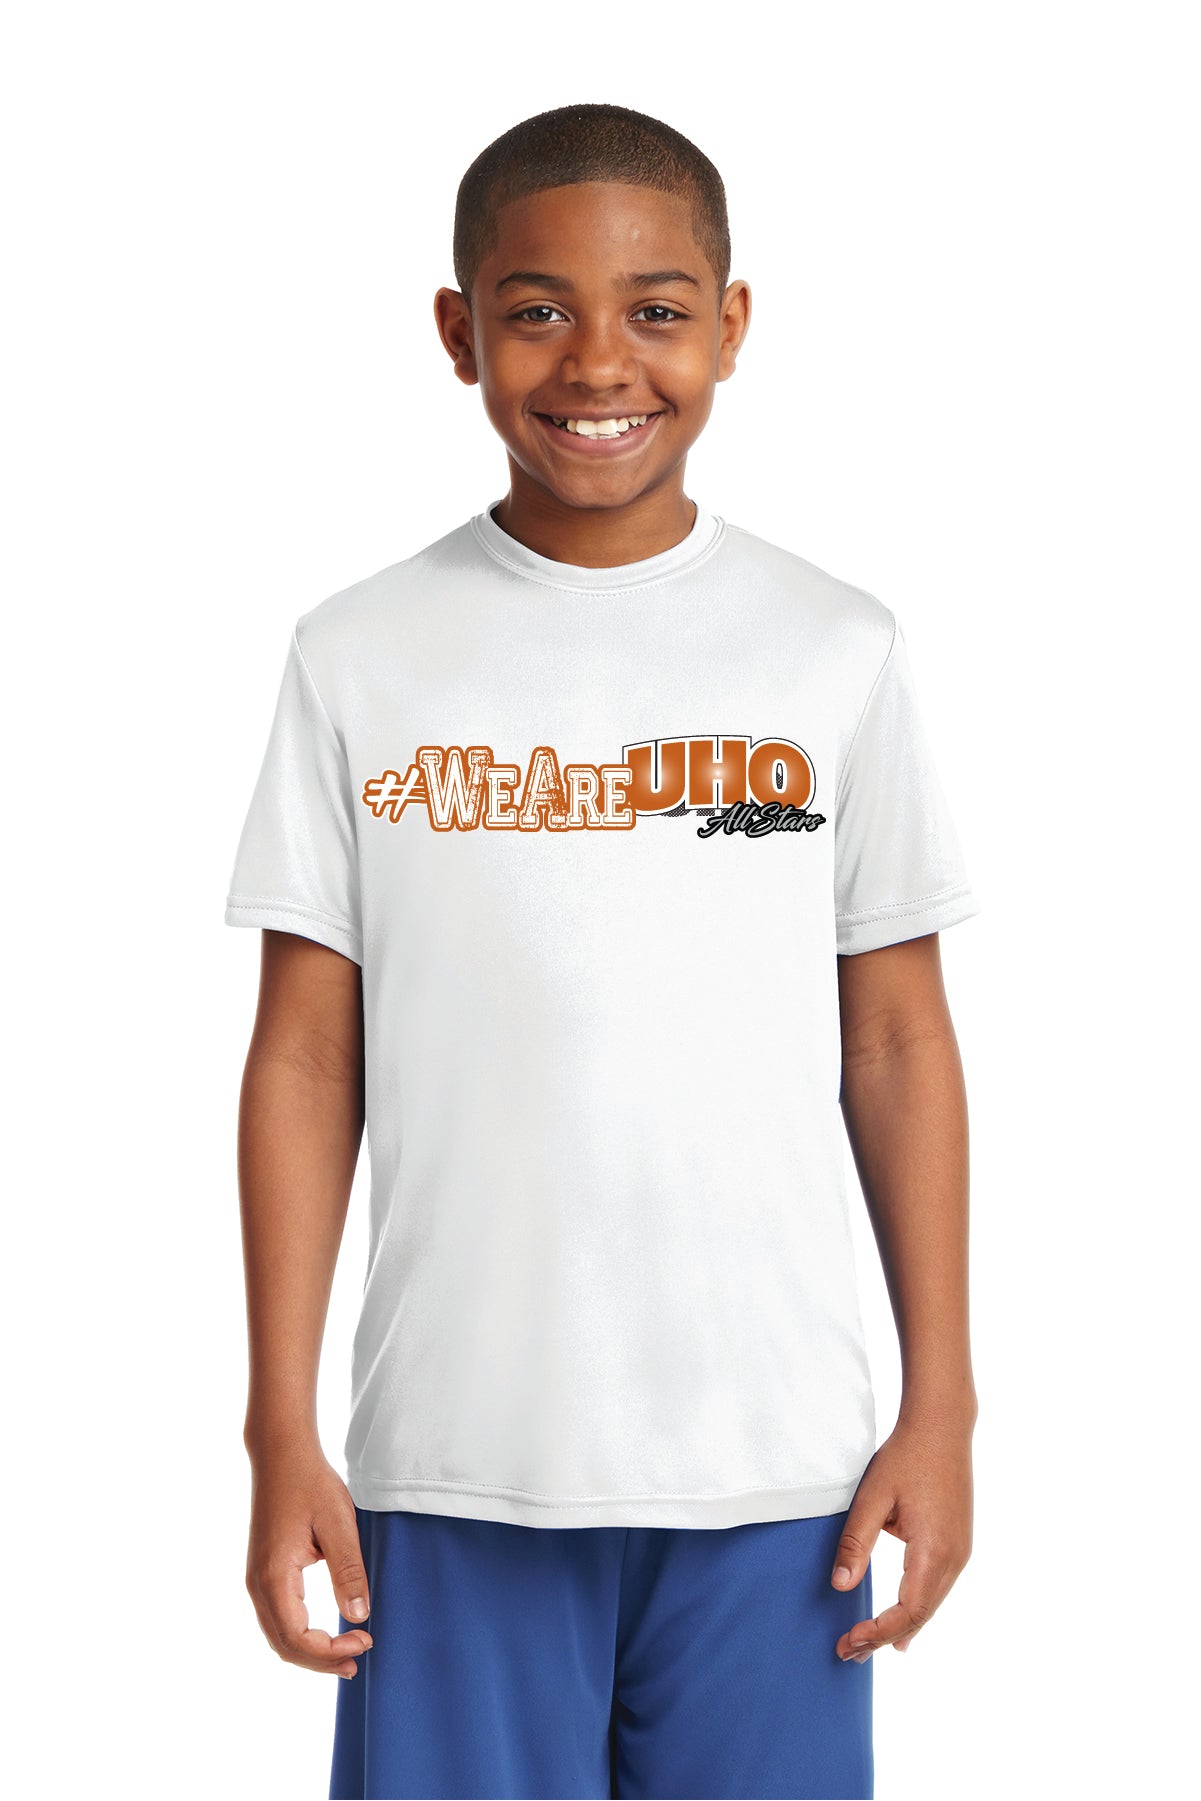 We Are UHO All Stars Moisture-Wicking T-Shirt